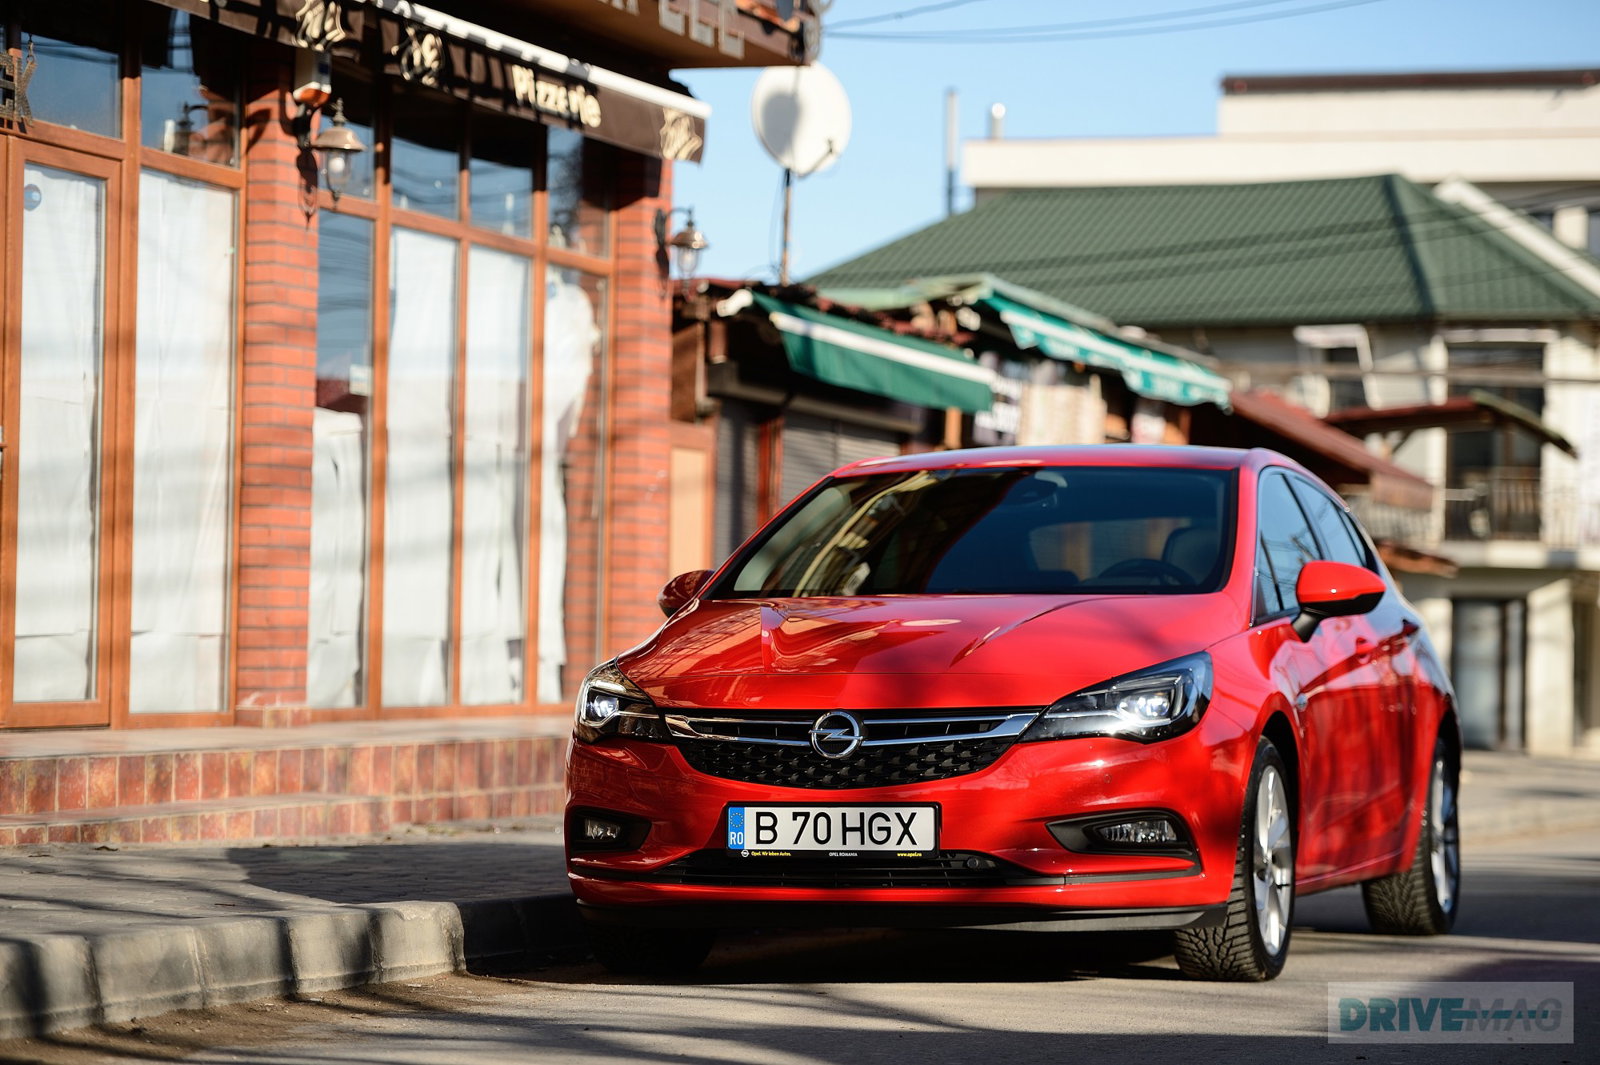 The Vauxhall Astra J stands the test of time 